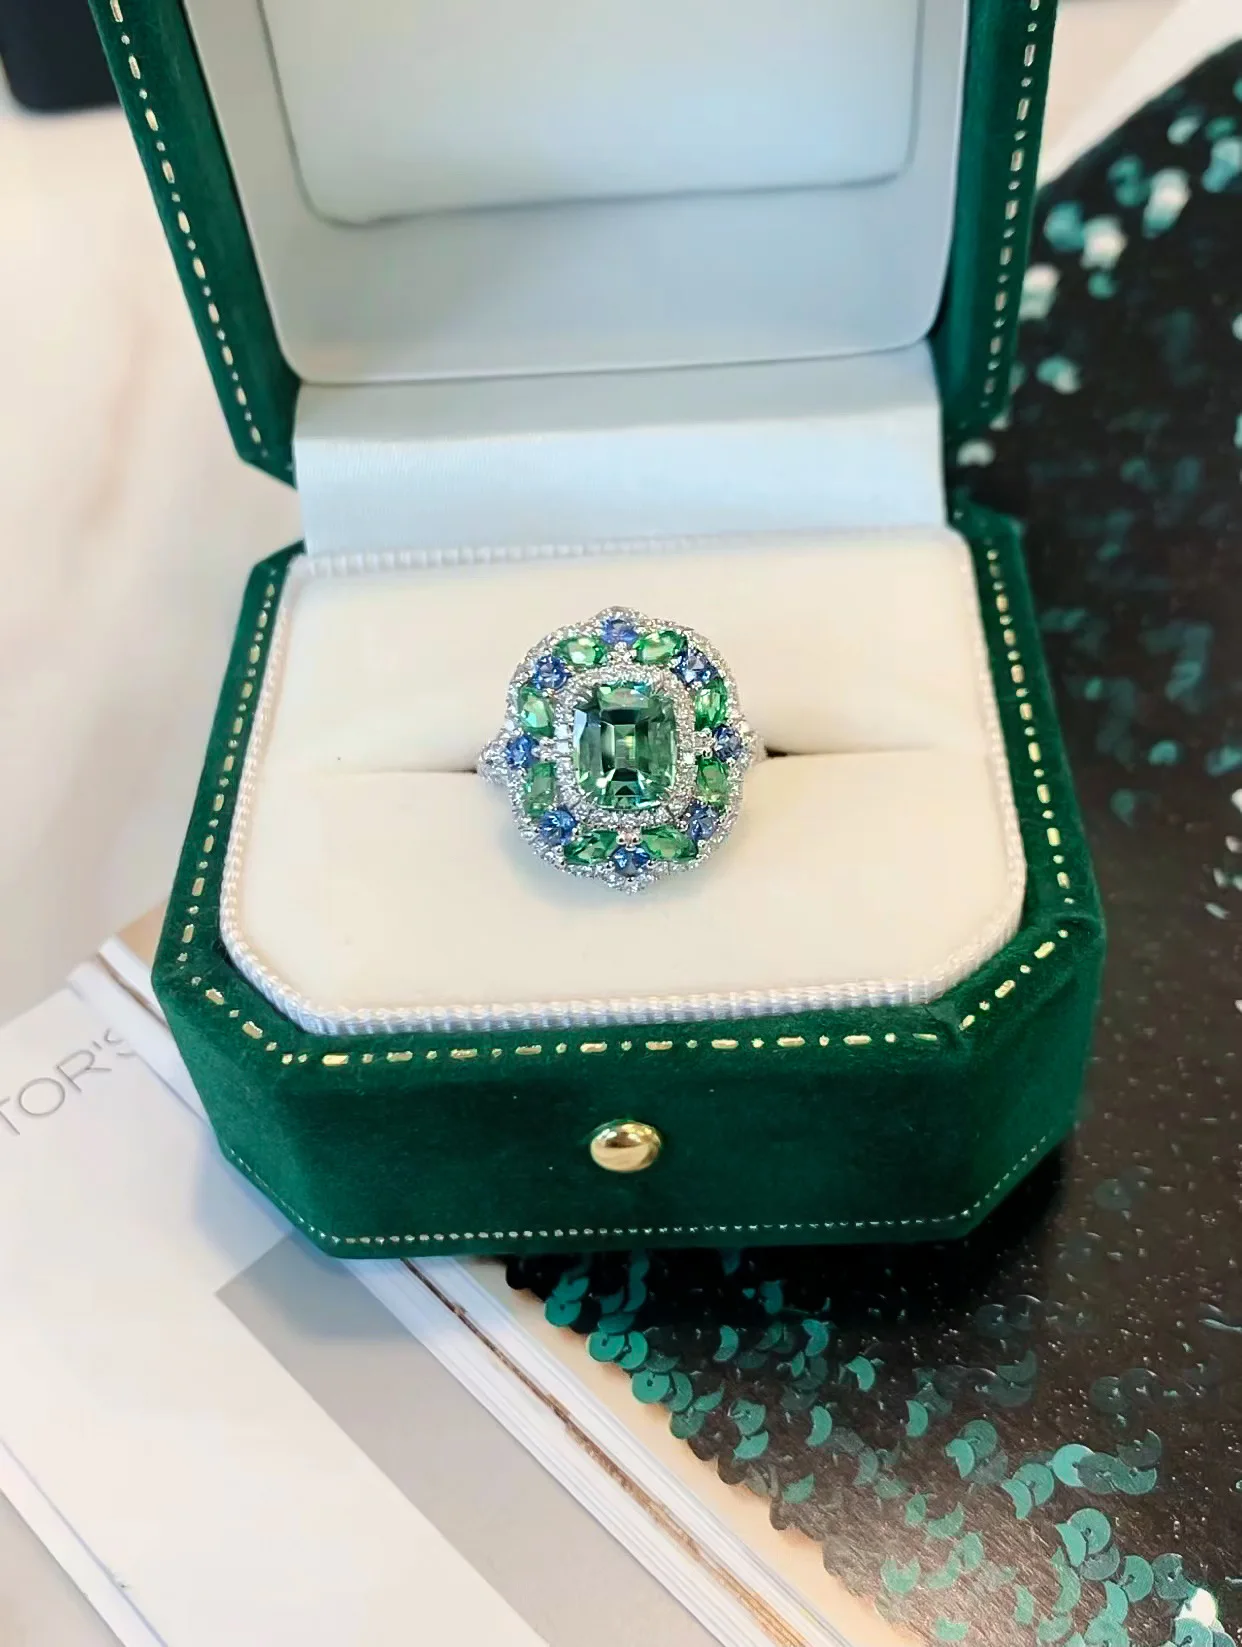 

2022 New European and American Style S925 Sterling Silver Secret Garden Afghanistan Green Tourmaline Senior Ladies Ring